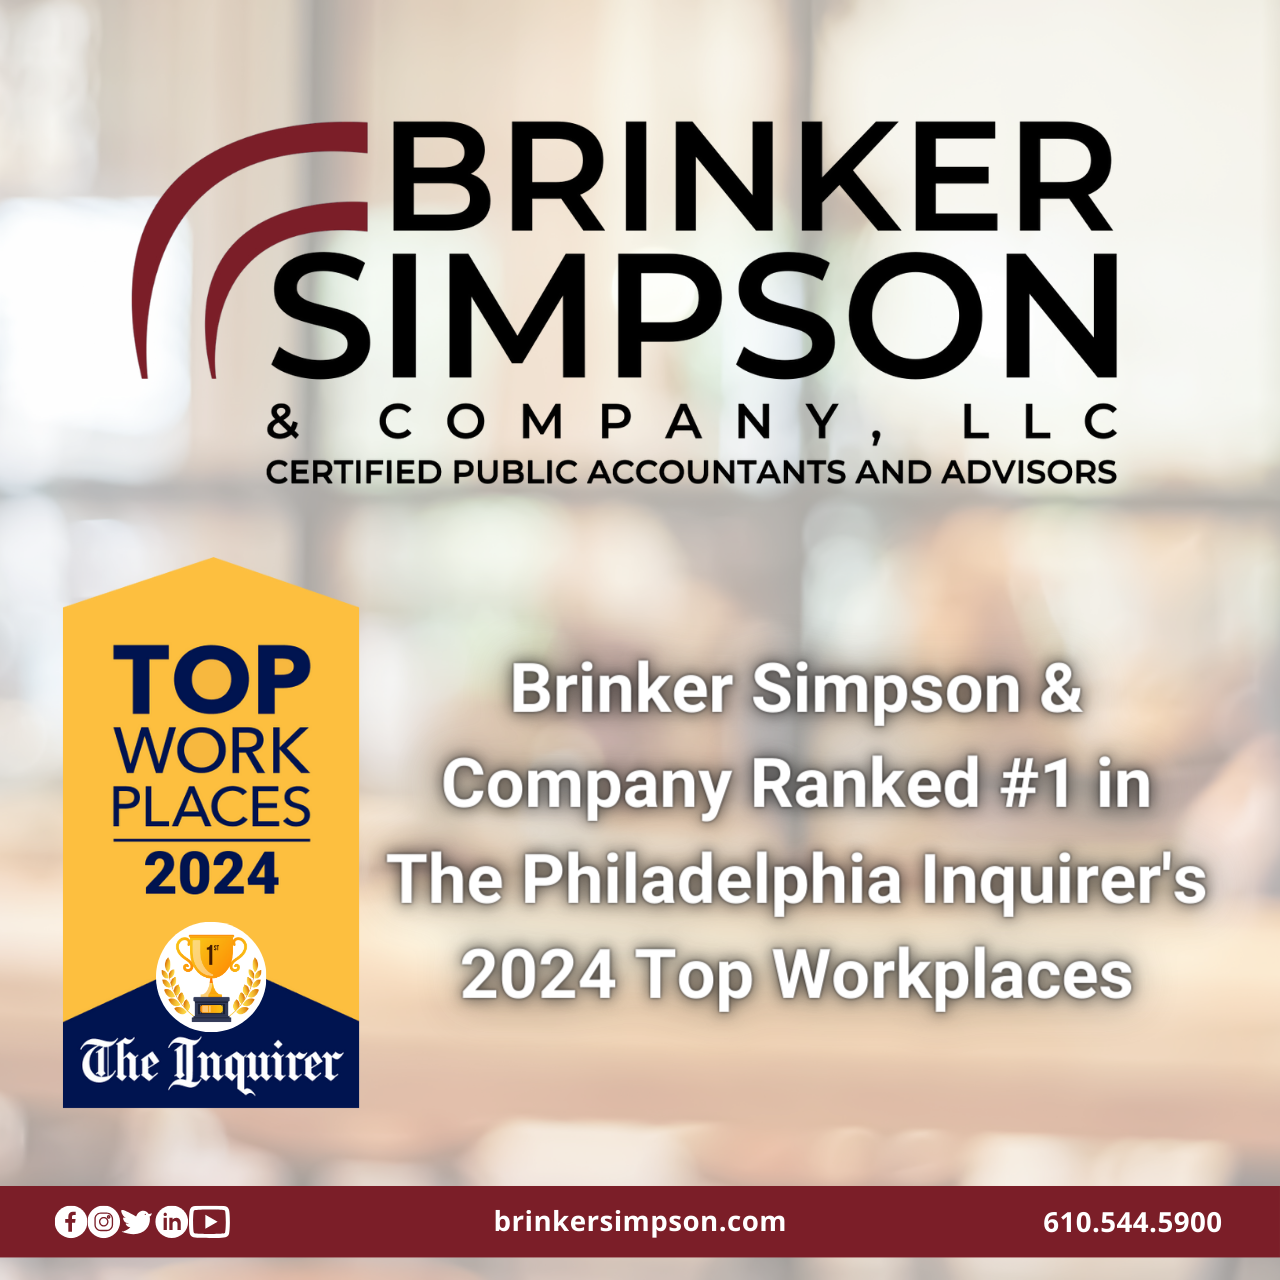 Brinker Simpson Ranked #1 in Inquirer's 2024 Top Workplaces